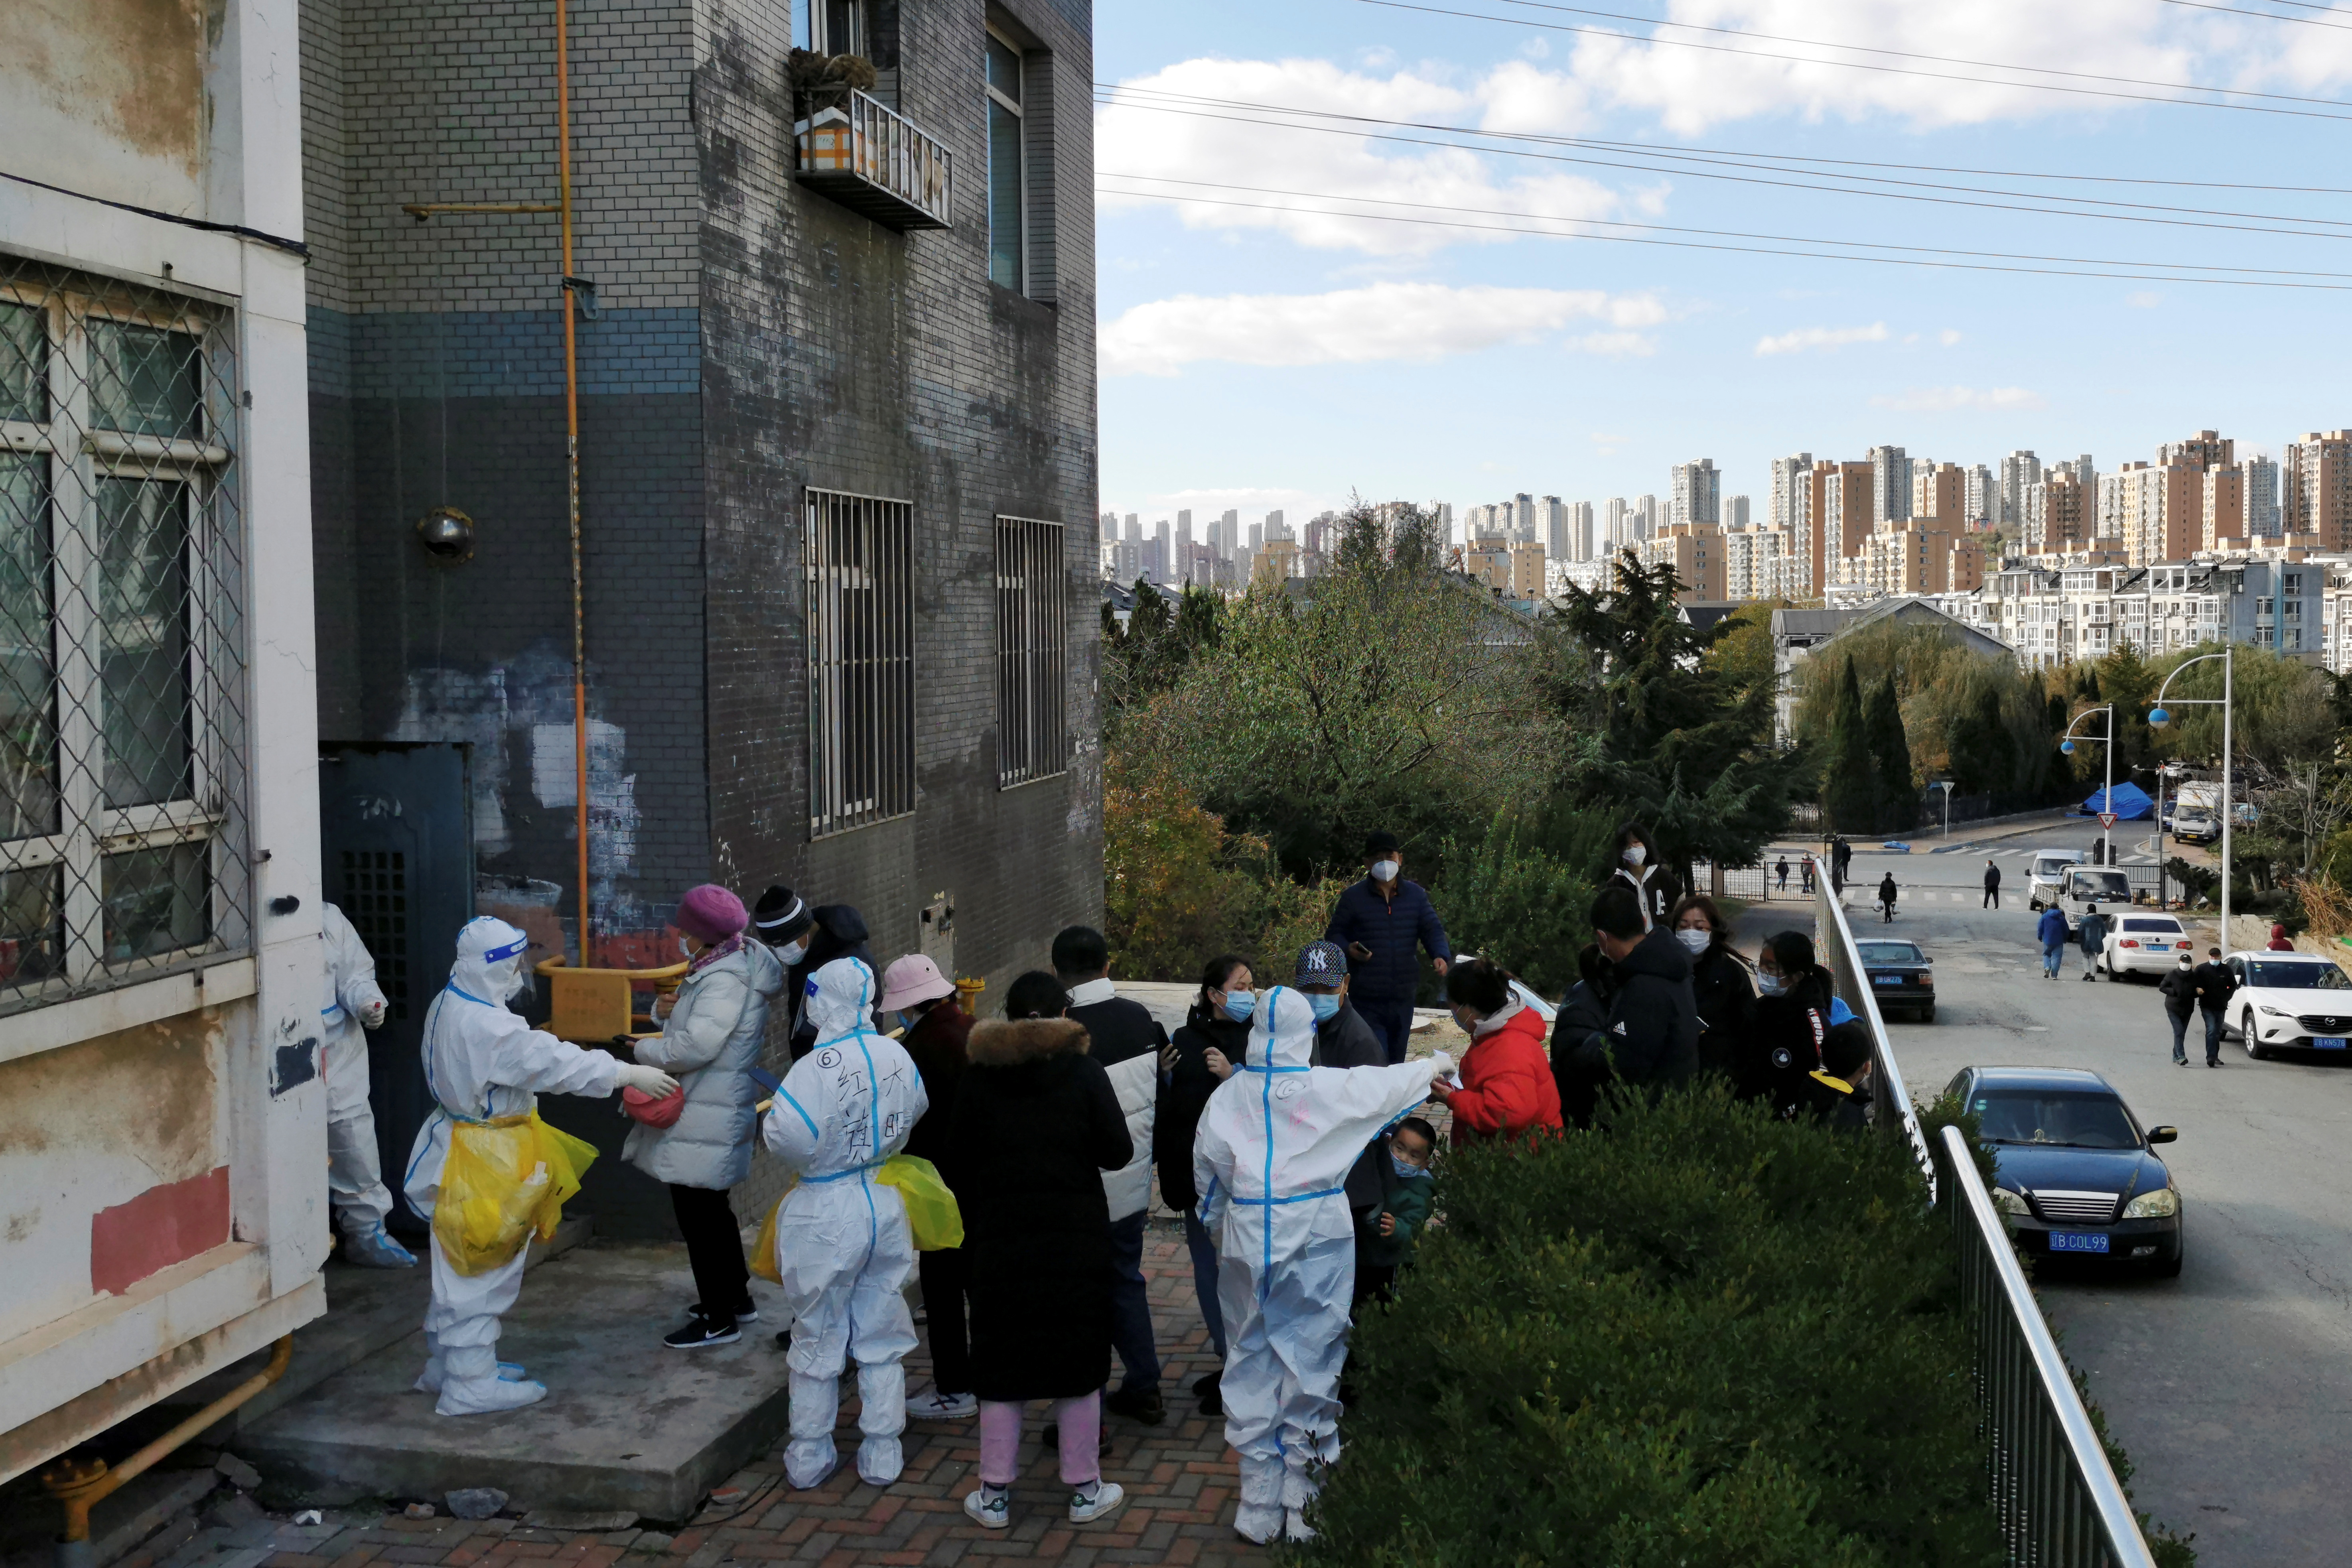 People line up for nucleic acid testing at a residential compound following local cases of the coronavirus disease (COVID-19) in Dalian, Liaoning province, China November 10, 2021. China Daily via REUTERS